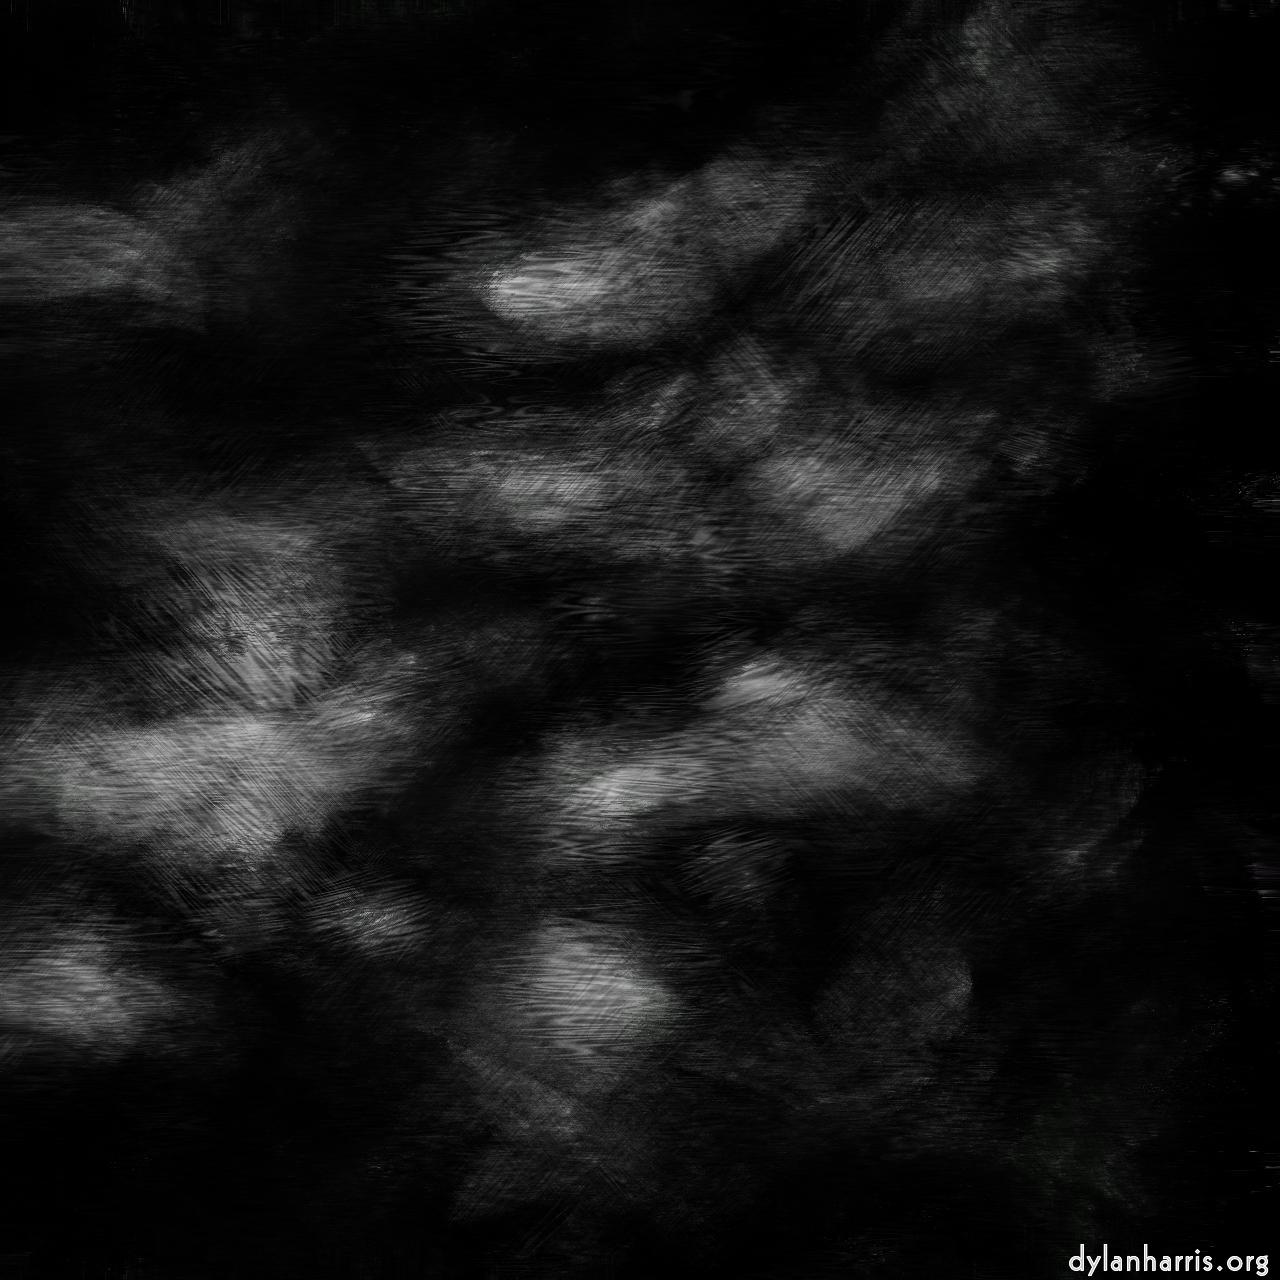 image: abstract natural media :: dry brush blend